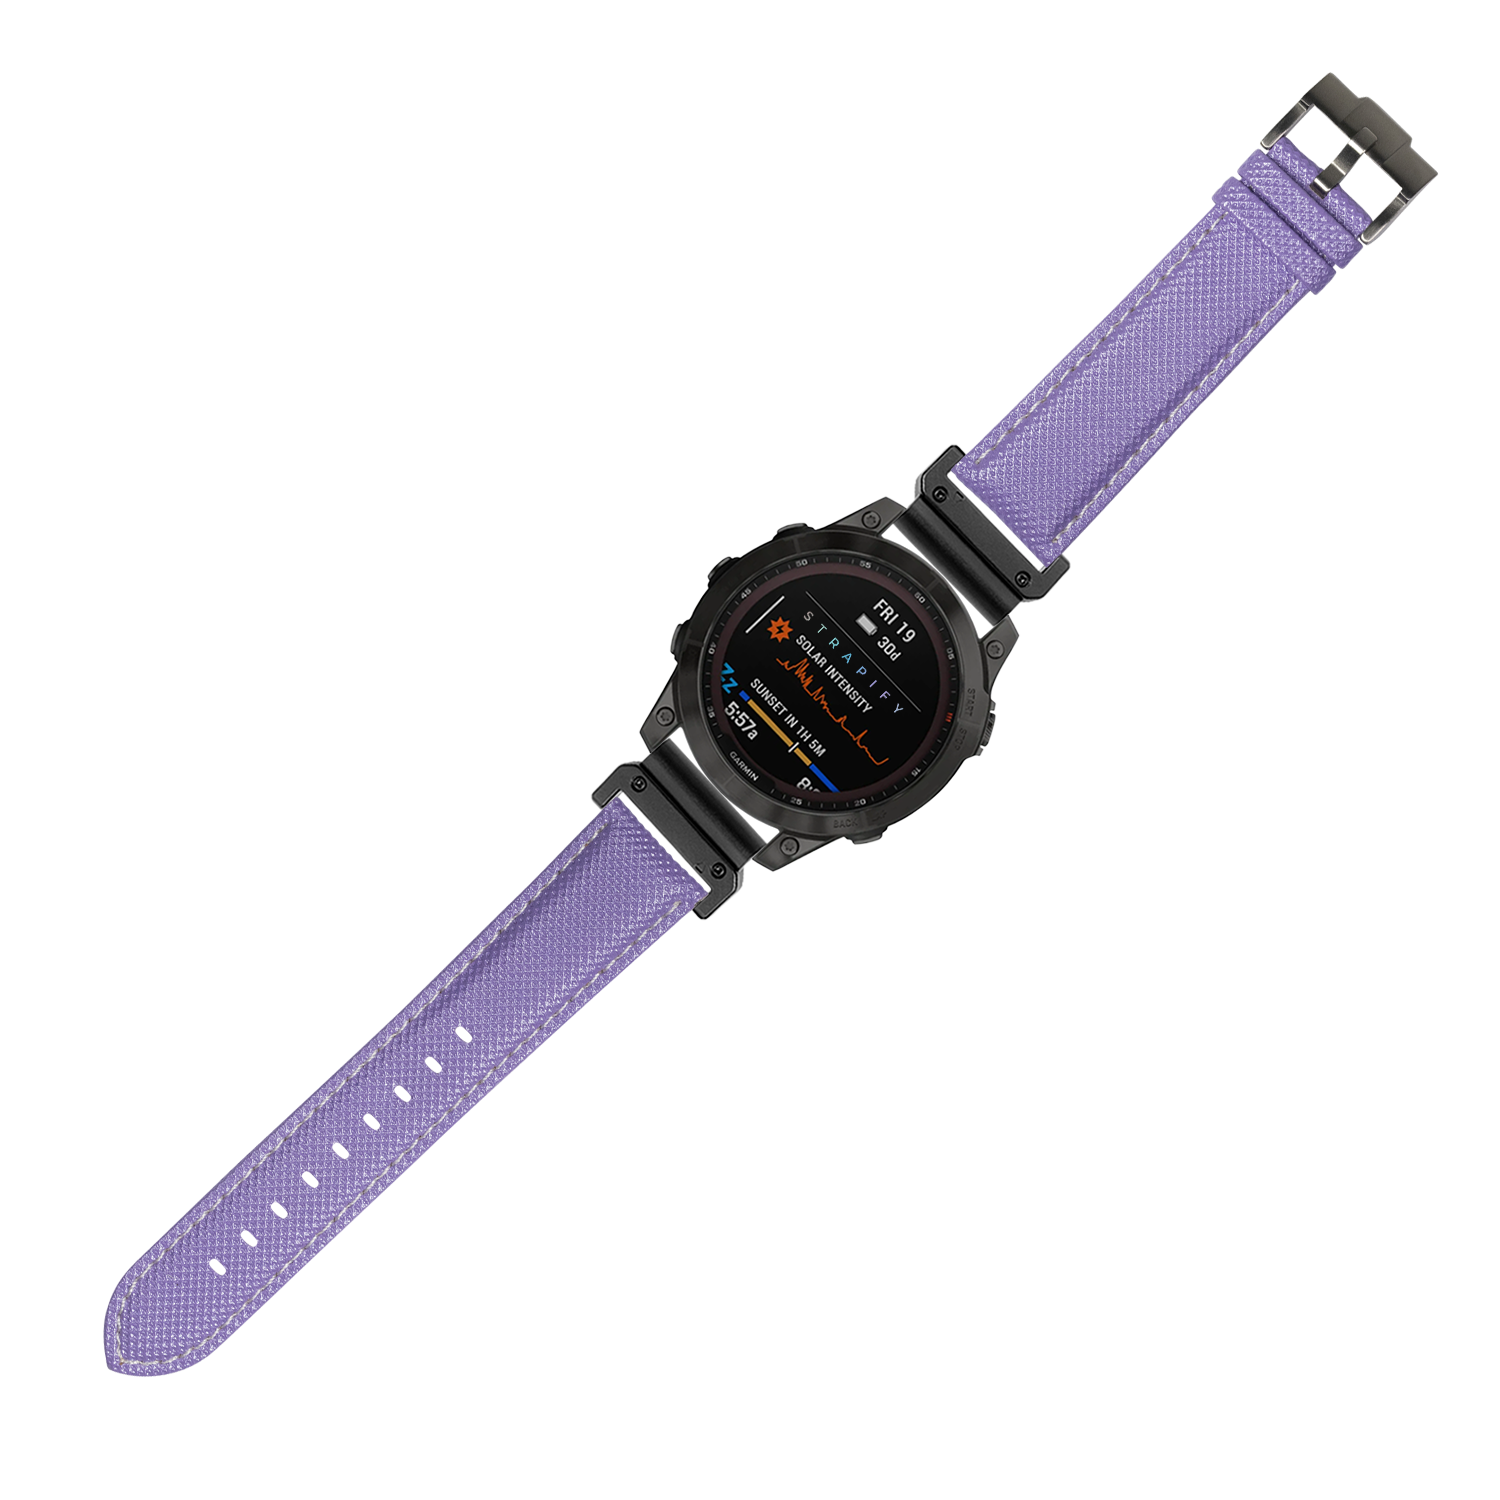 [QuickFit] Sailcloth - Lavender with White Stitching 22mm